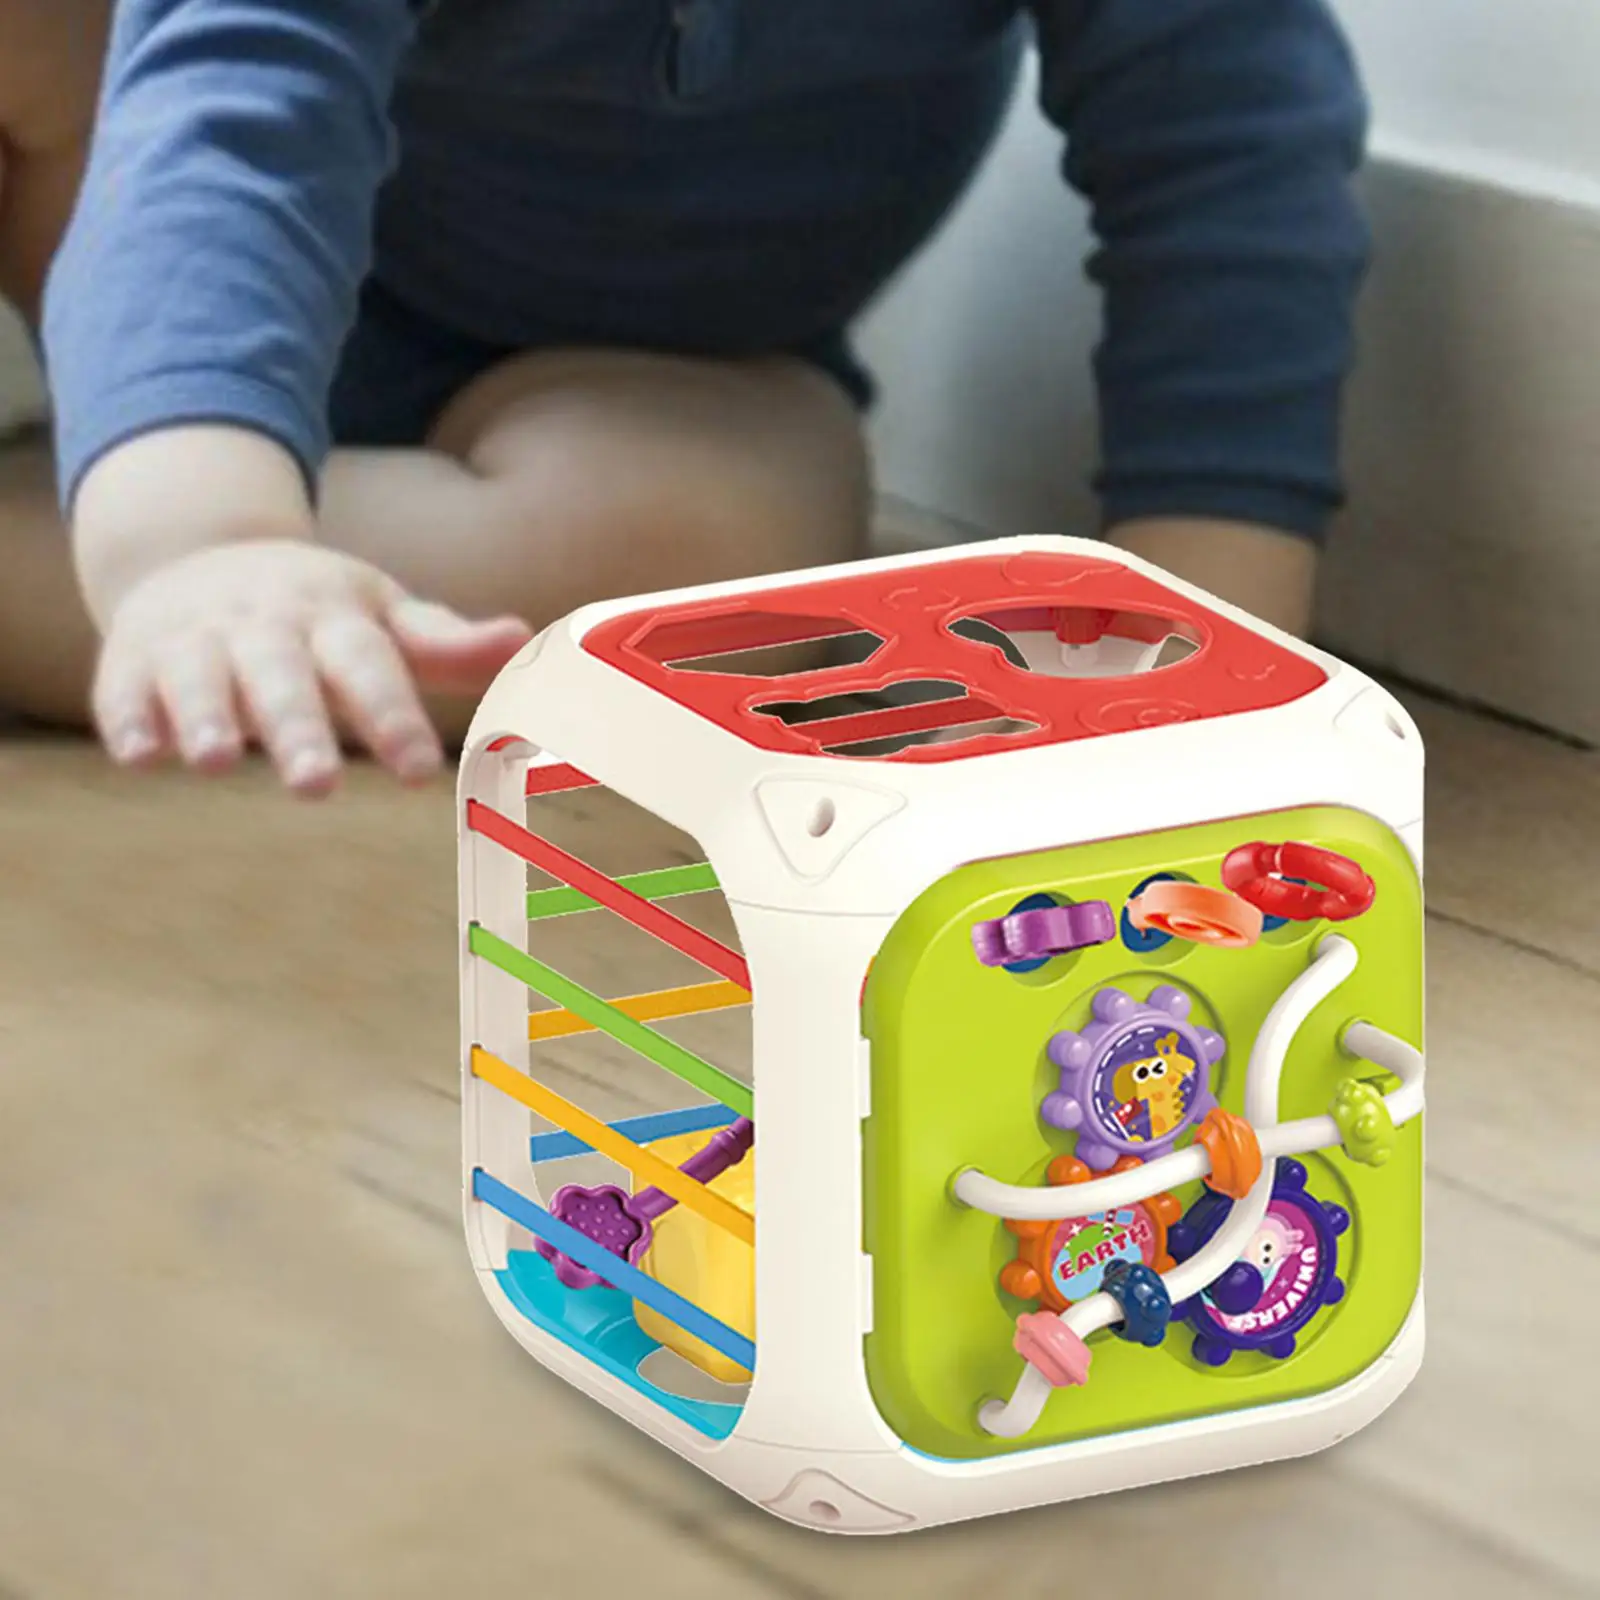 Montessori Baby Shape Sorter Toys Educational for 1 2 3 Year Old Babies Kids